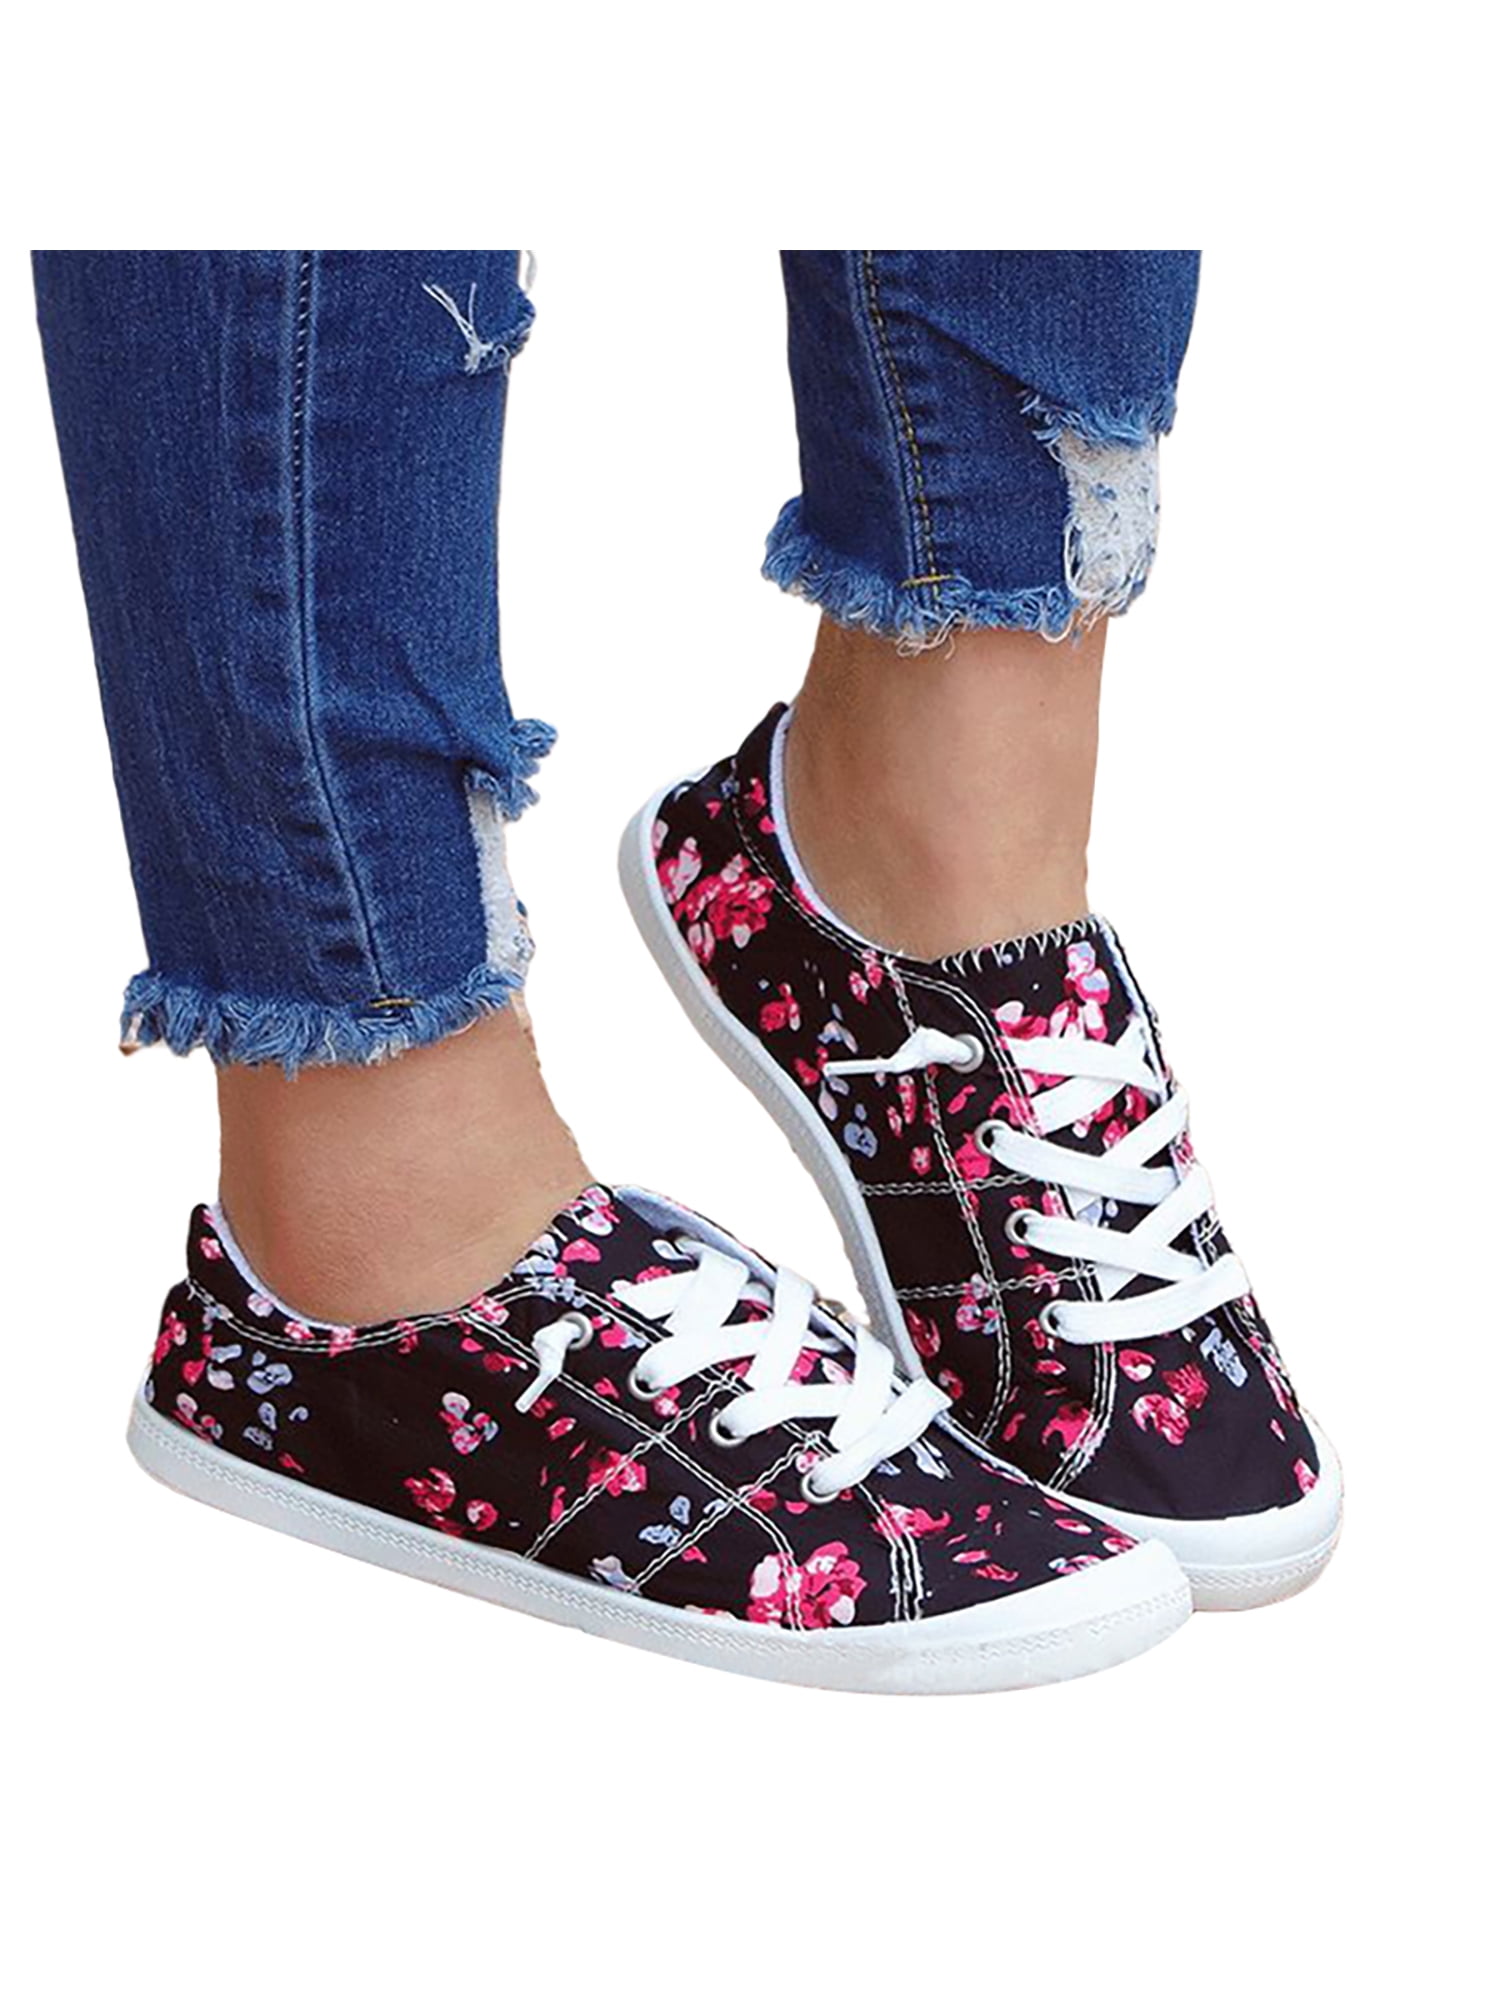 Canvas Running Shoes Cute Cat Heads Flowers Butterflies On Canvas Slip-on Casual Printing Comfortable Low Top Sports Shoes for Women